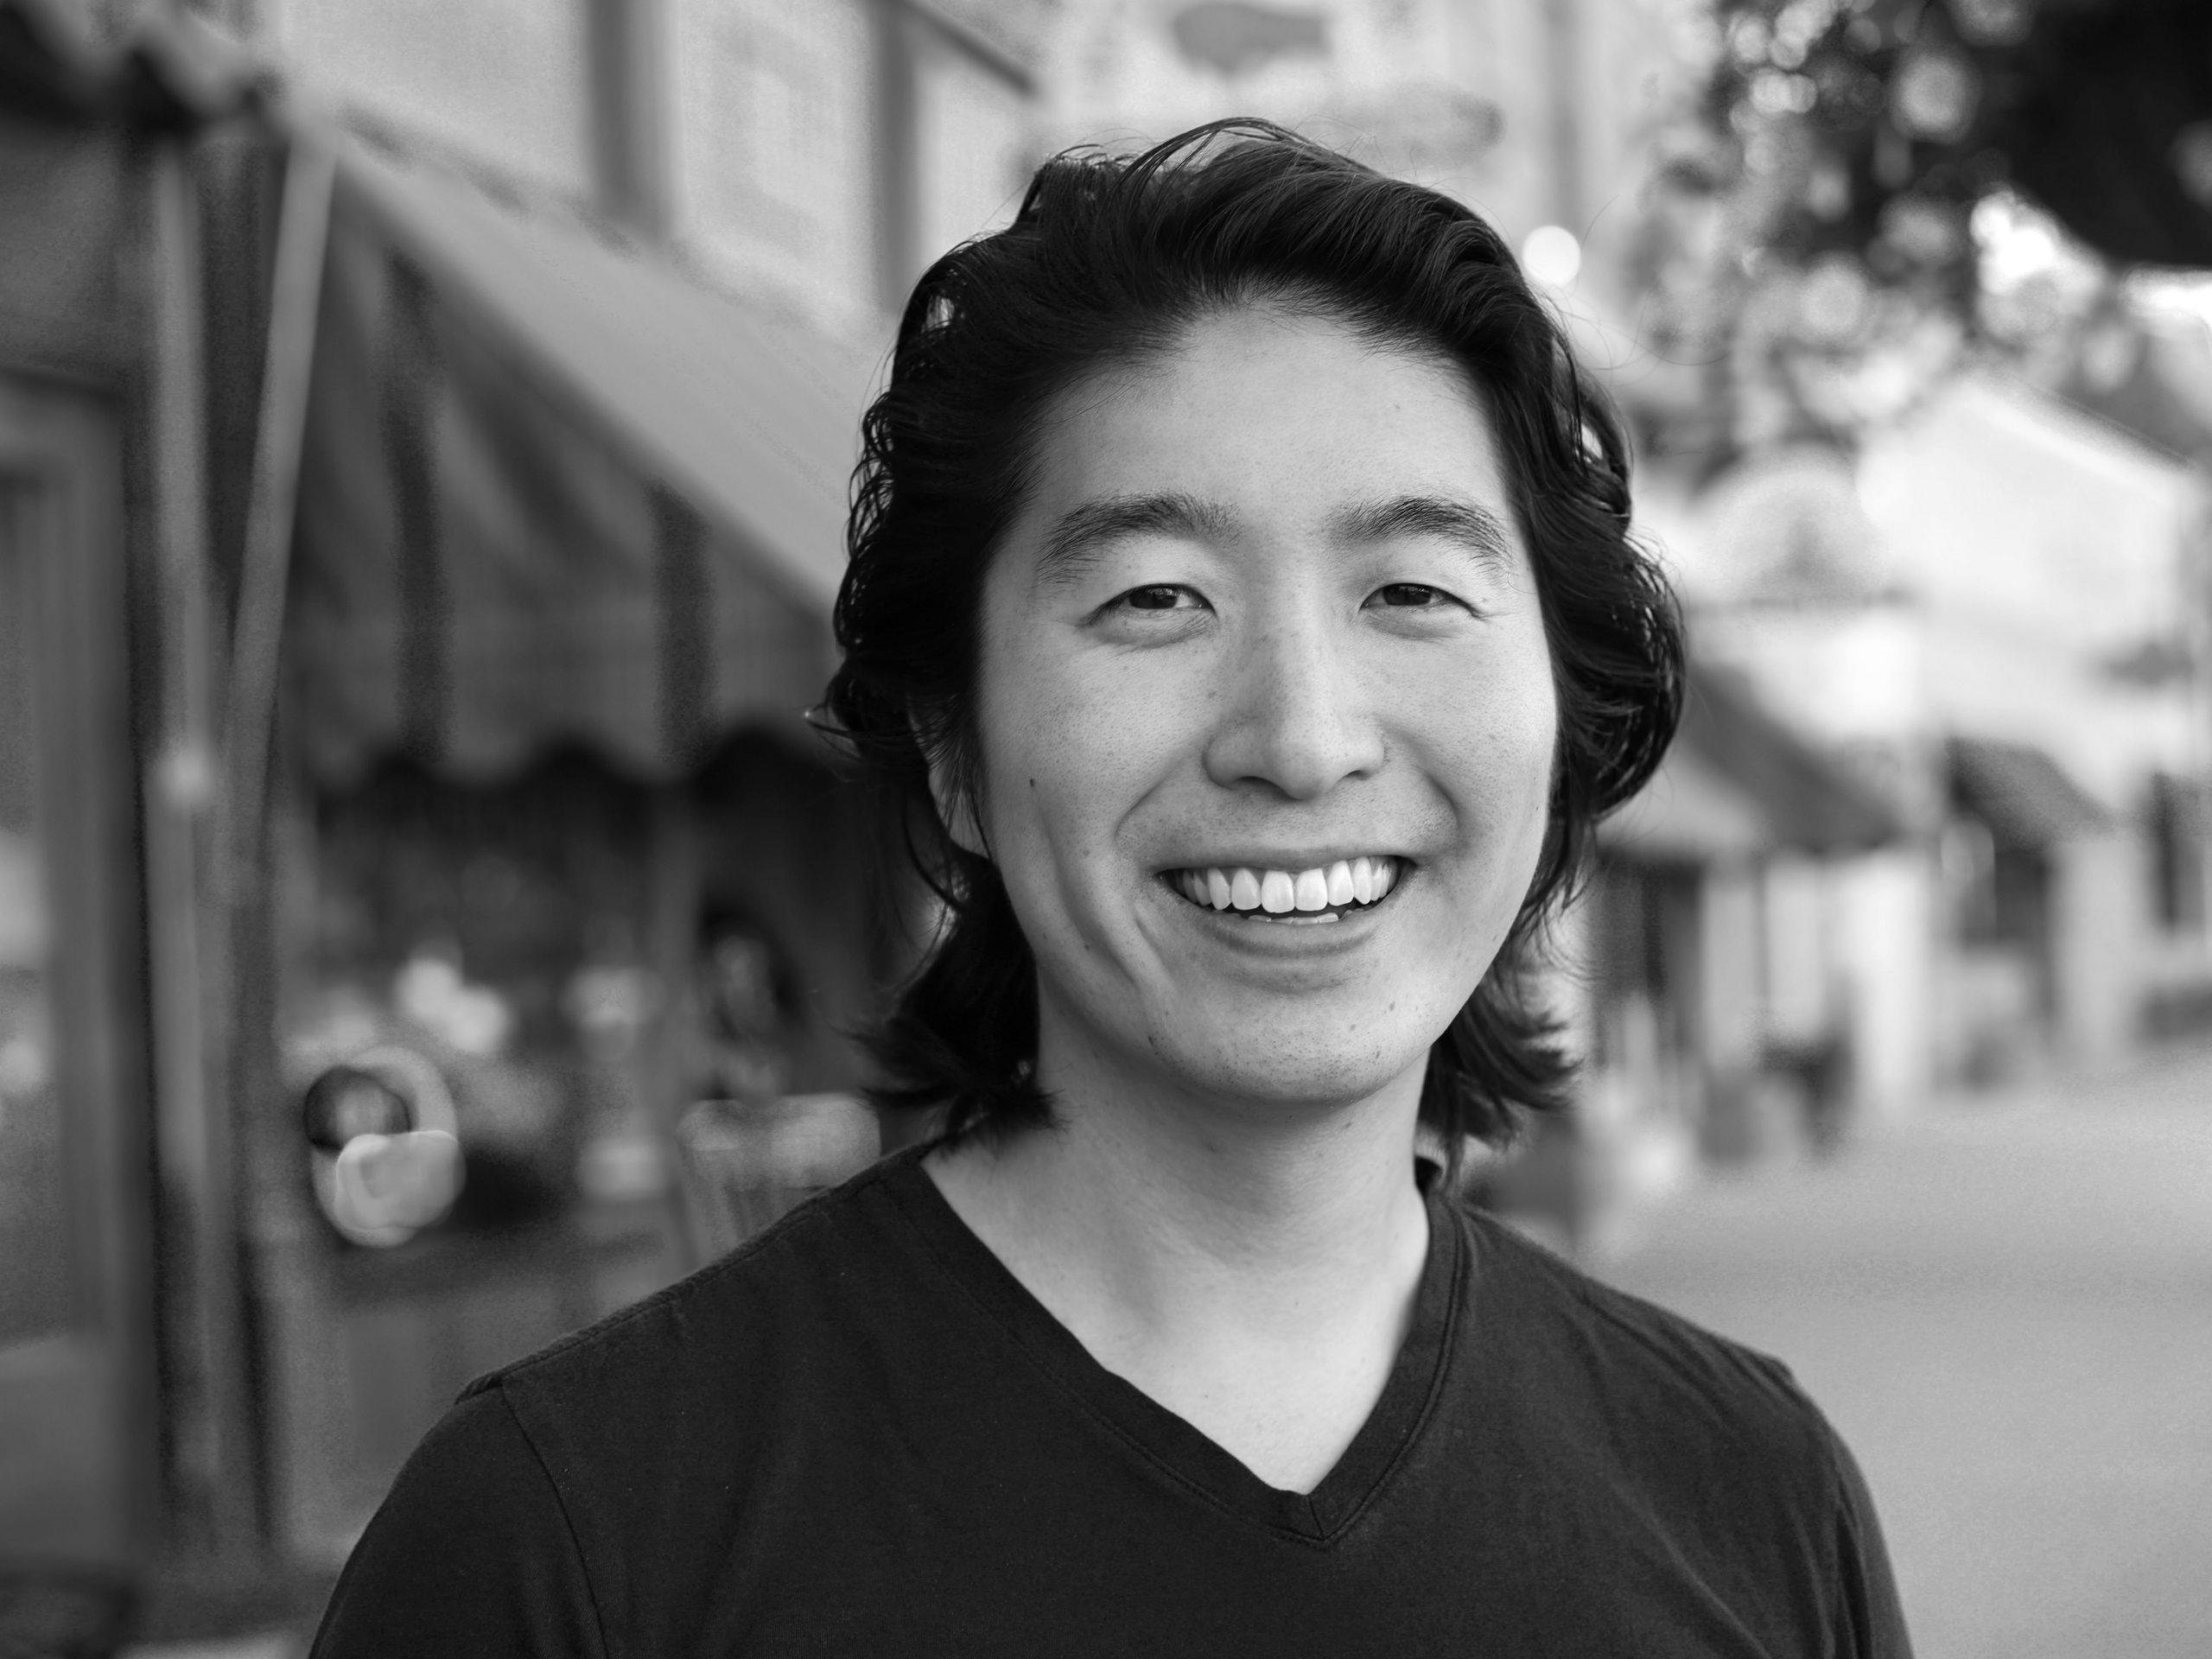 Kevin Song, founder and CEO of withco